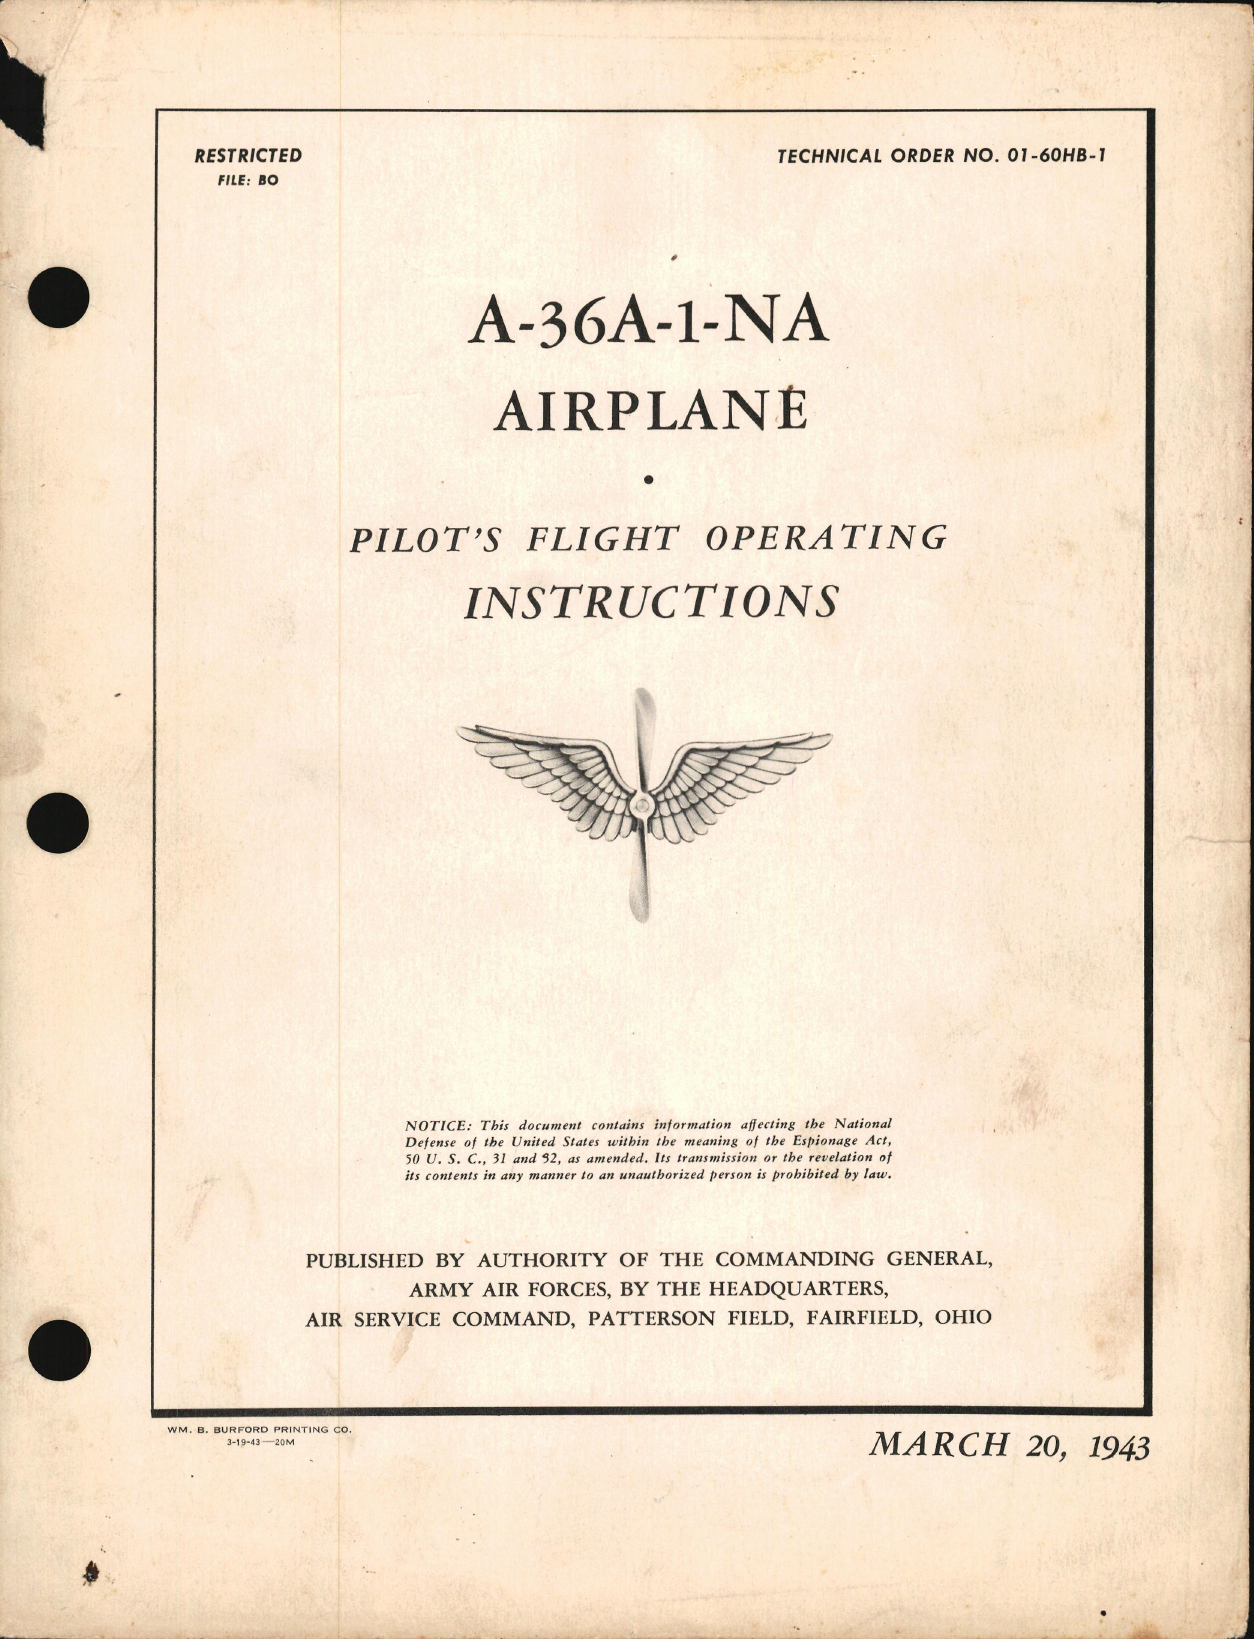 Sample page 1 from AirCorps Library document: Pilot's Flight Operating Instructions for A-36A-1-NA